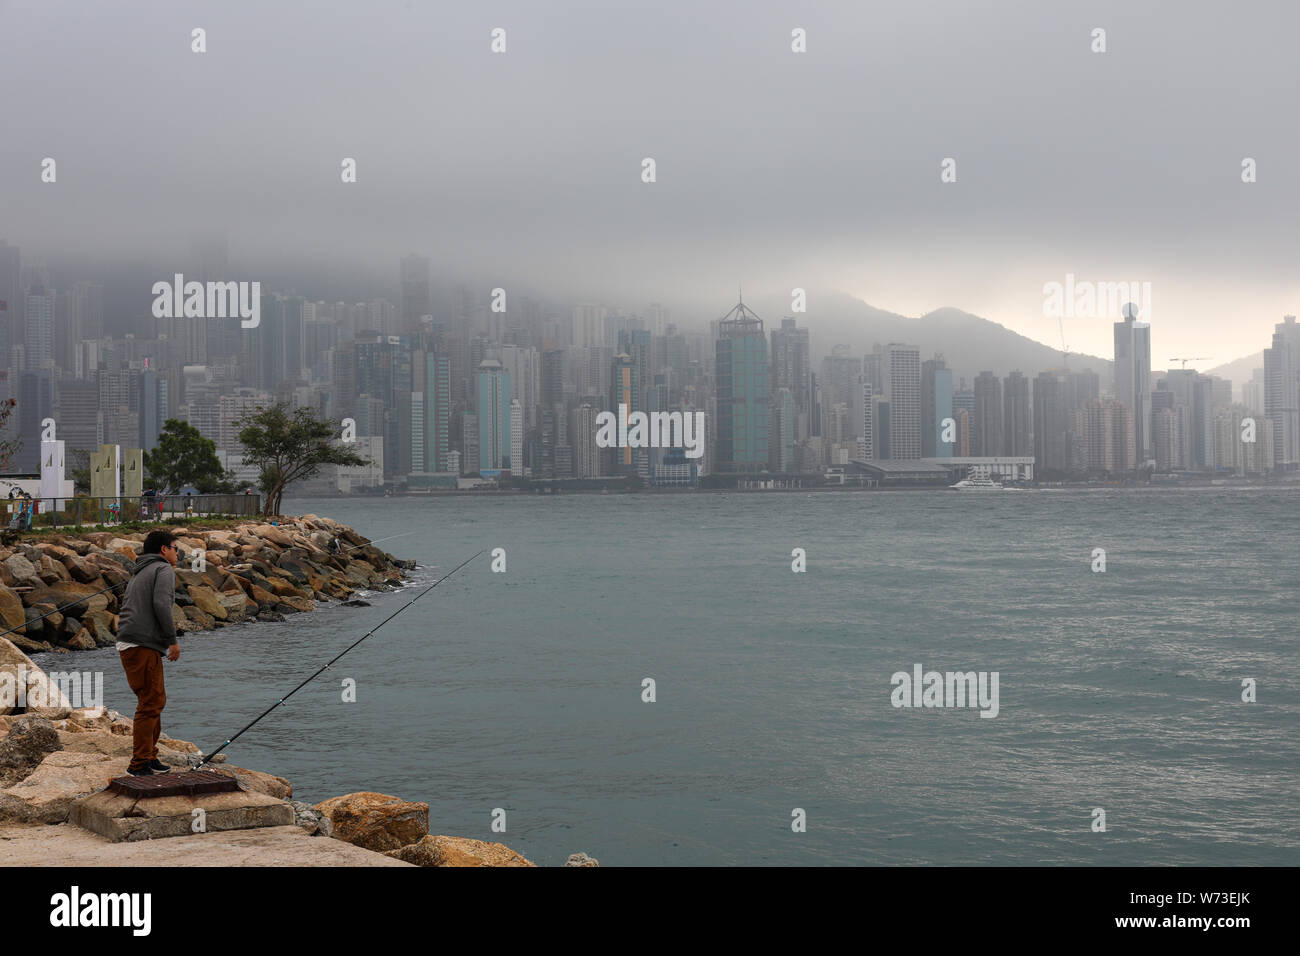 Man with a fishing rod in Yau Ma Tei, Hong Kong Island skyscrapers in the backgroung, on a foggy day Stock Photo